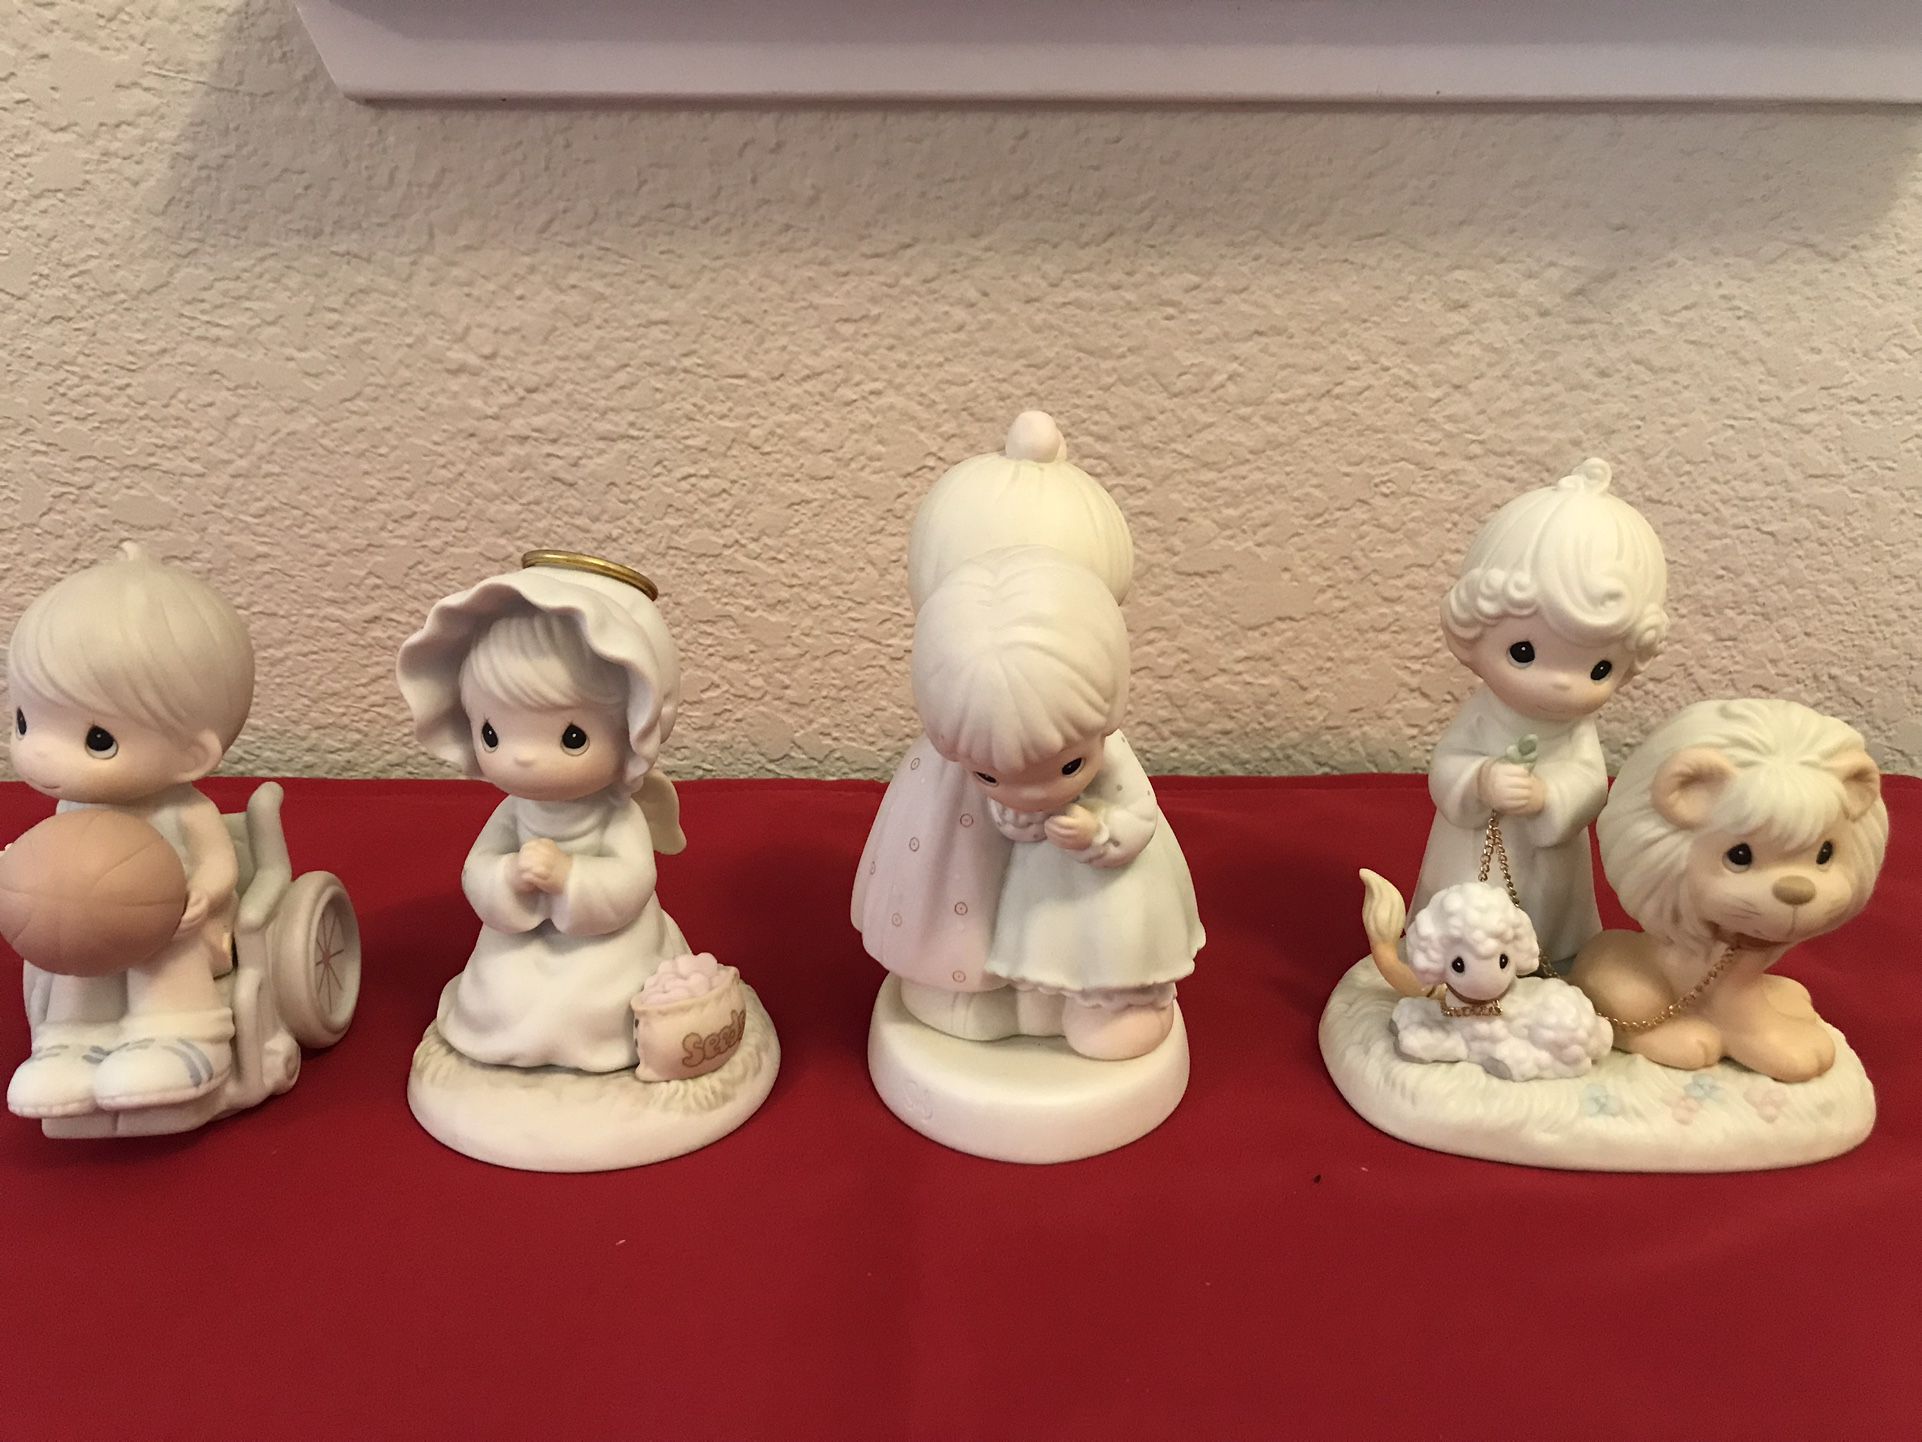 A group of 4 vintage Precious Moments figurines